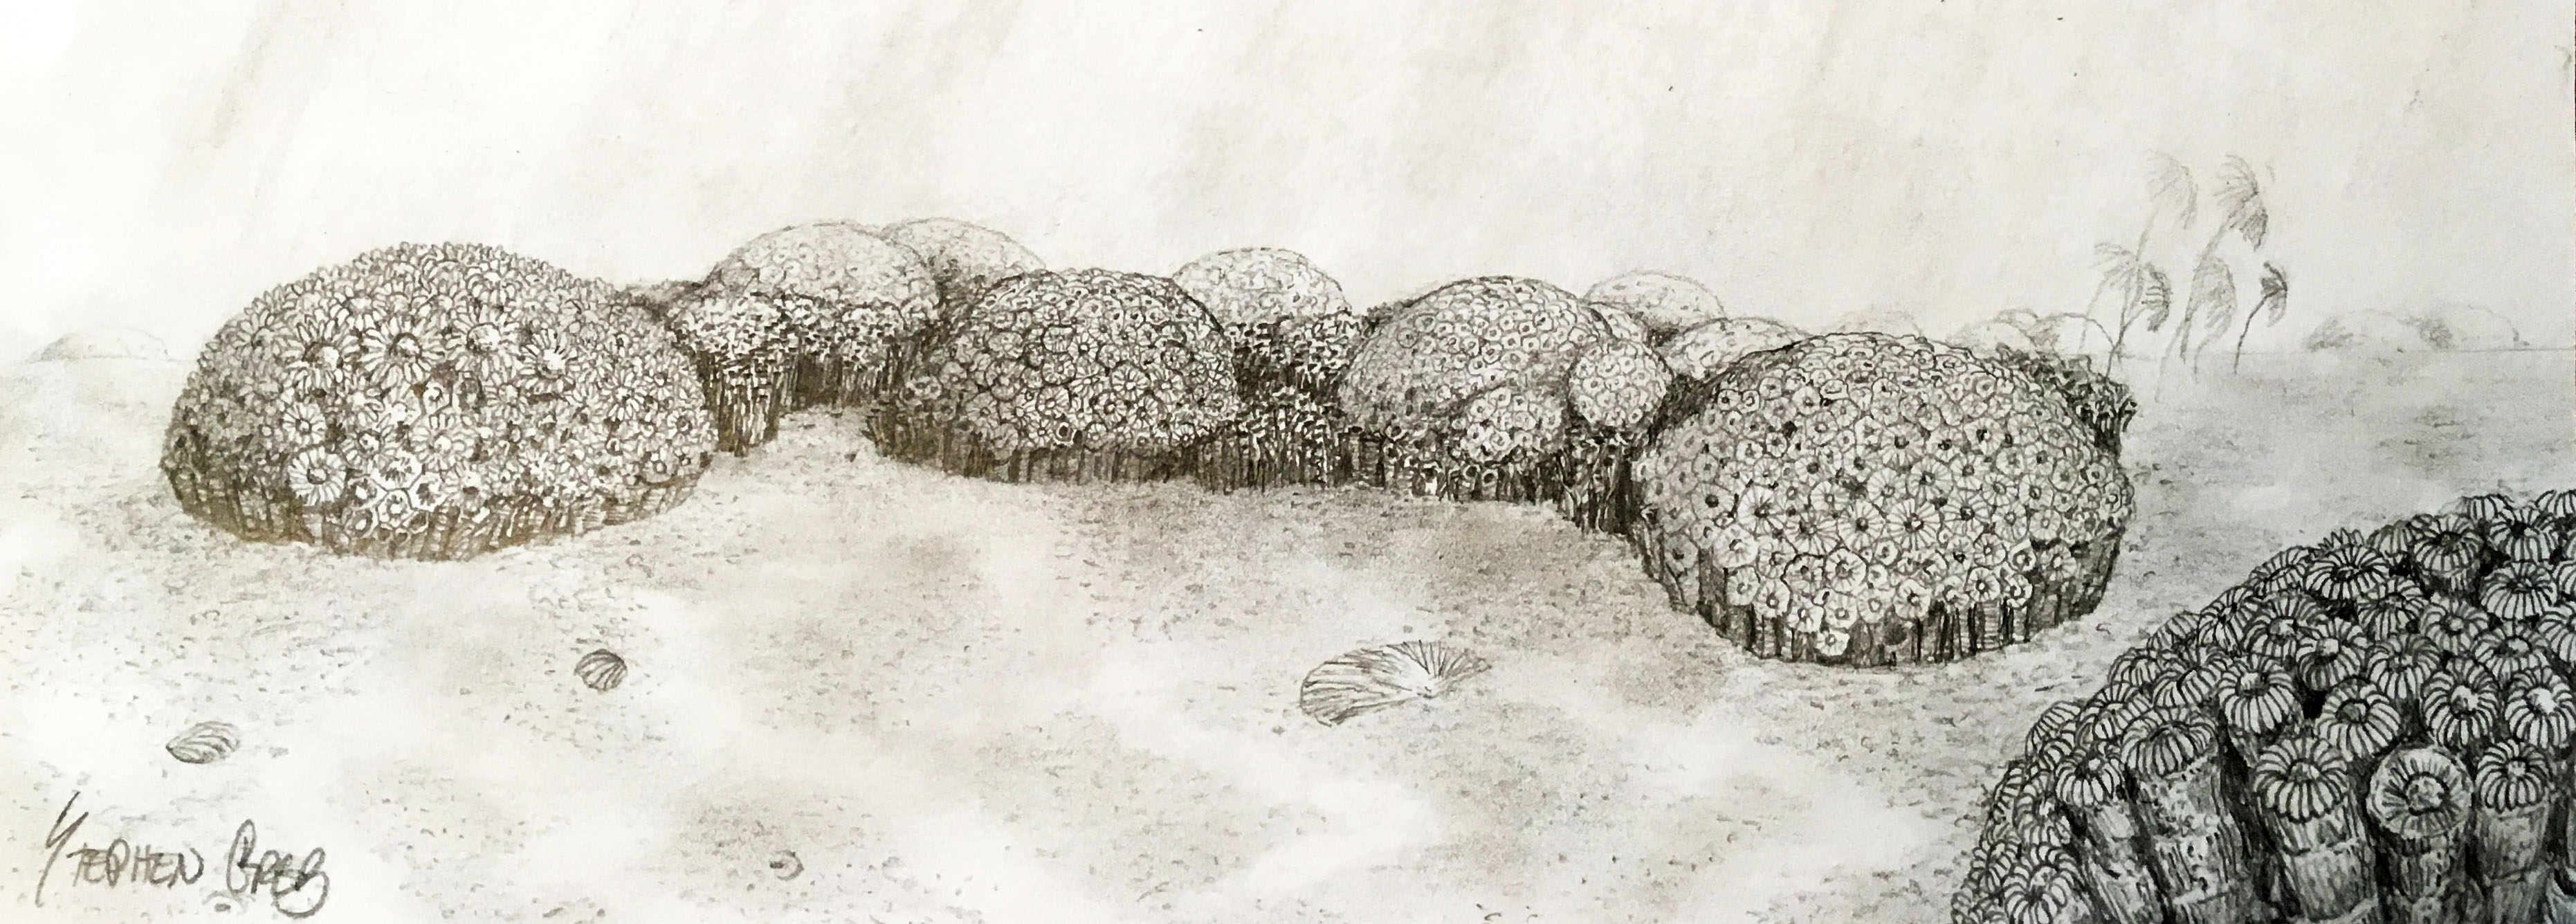 The seafloor during deposition of the St. Louis Limestone, with colonies of the honeycomb coral Acrocyathus floriformus and A. proliferum, and thin-tubed colonies of the pipe-organ coral Syringopora. Illustration by Stephen Greb.